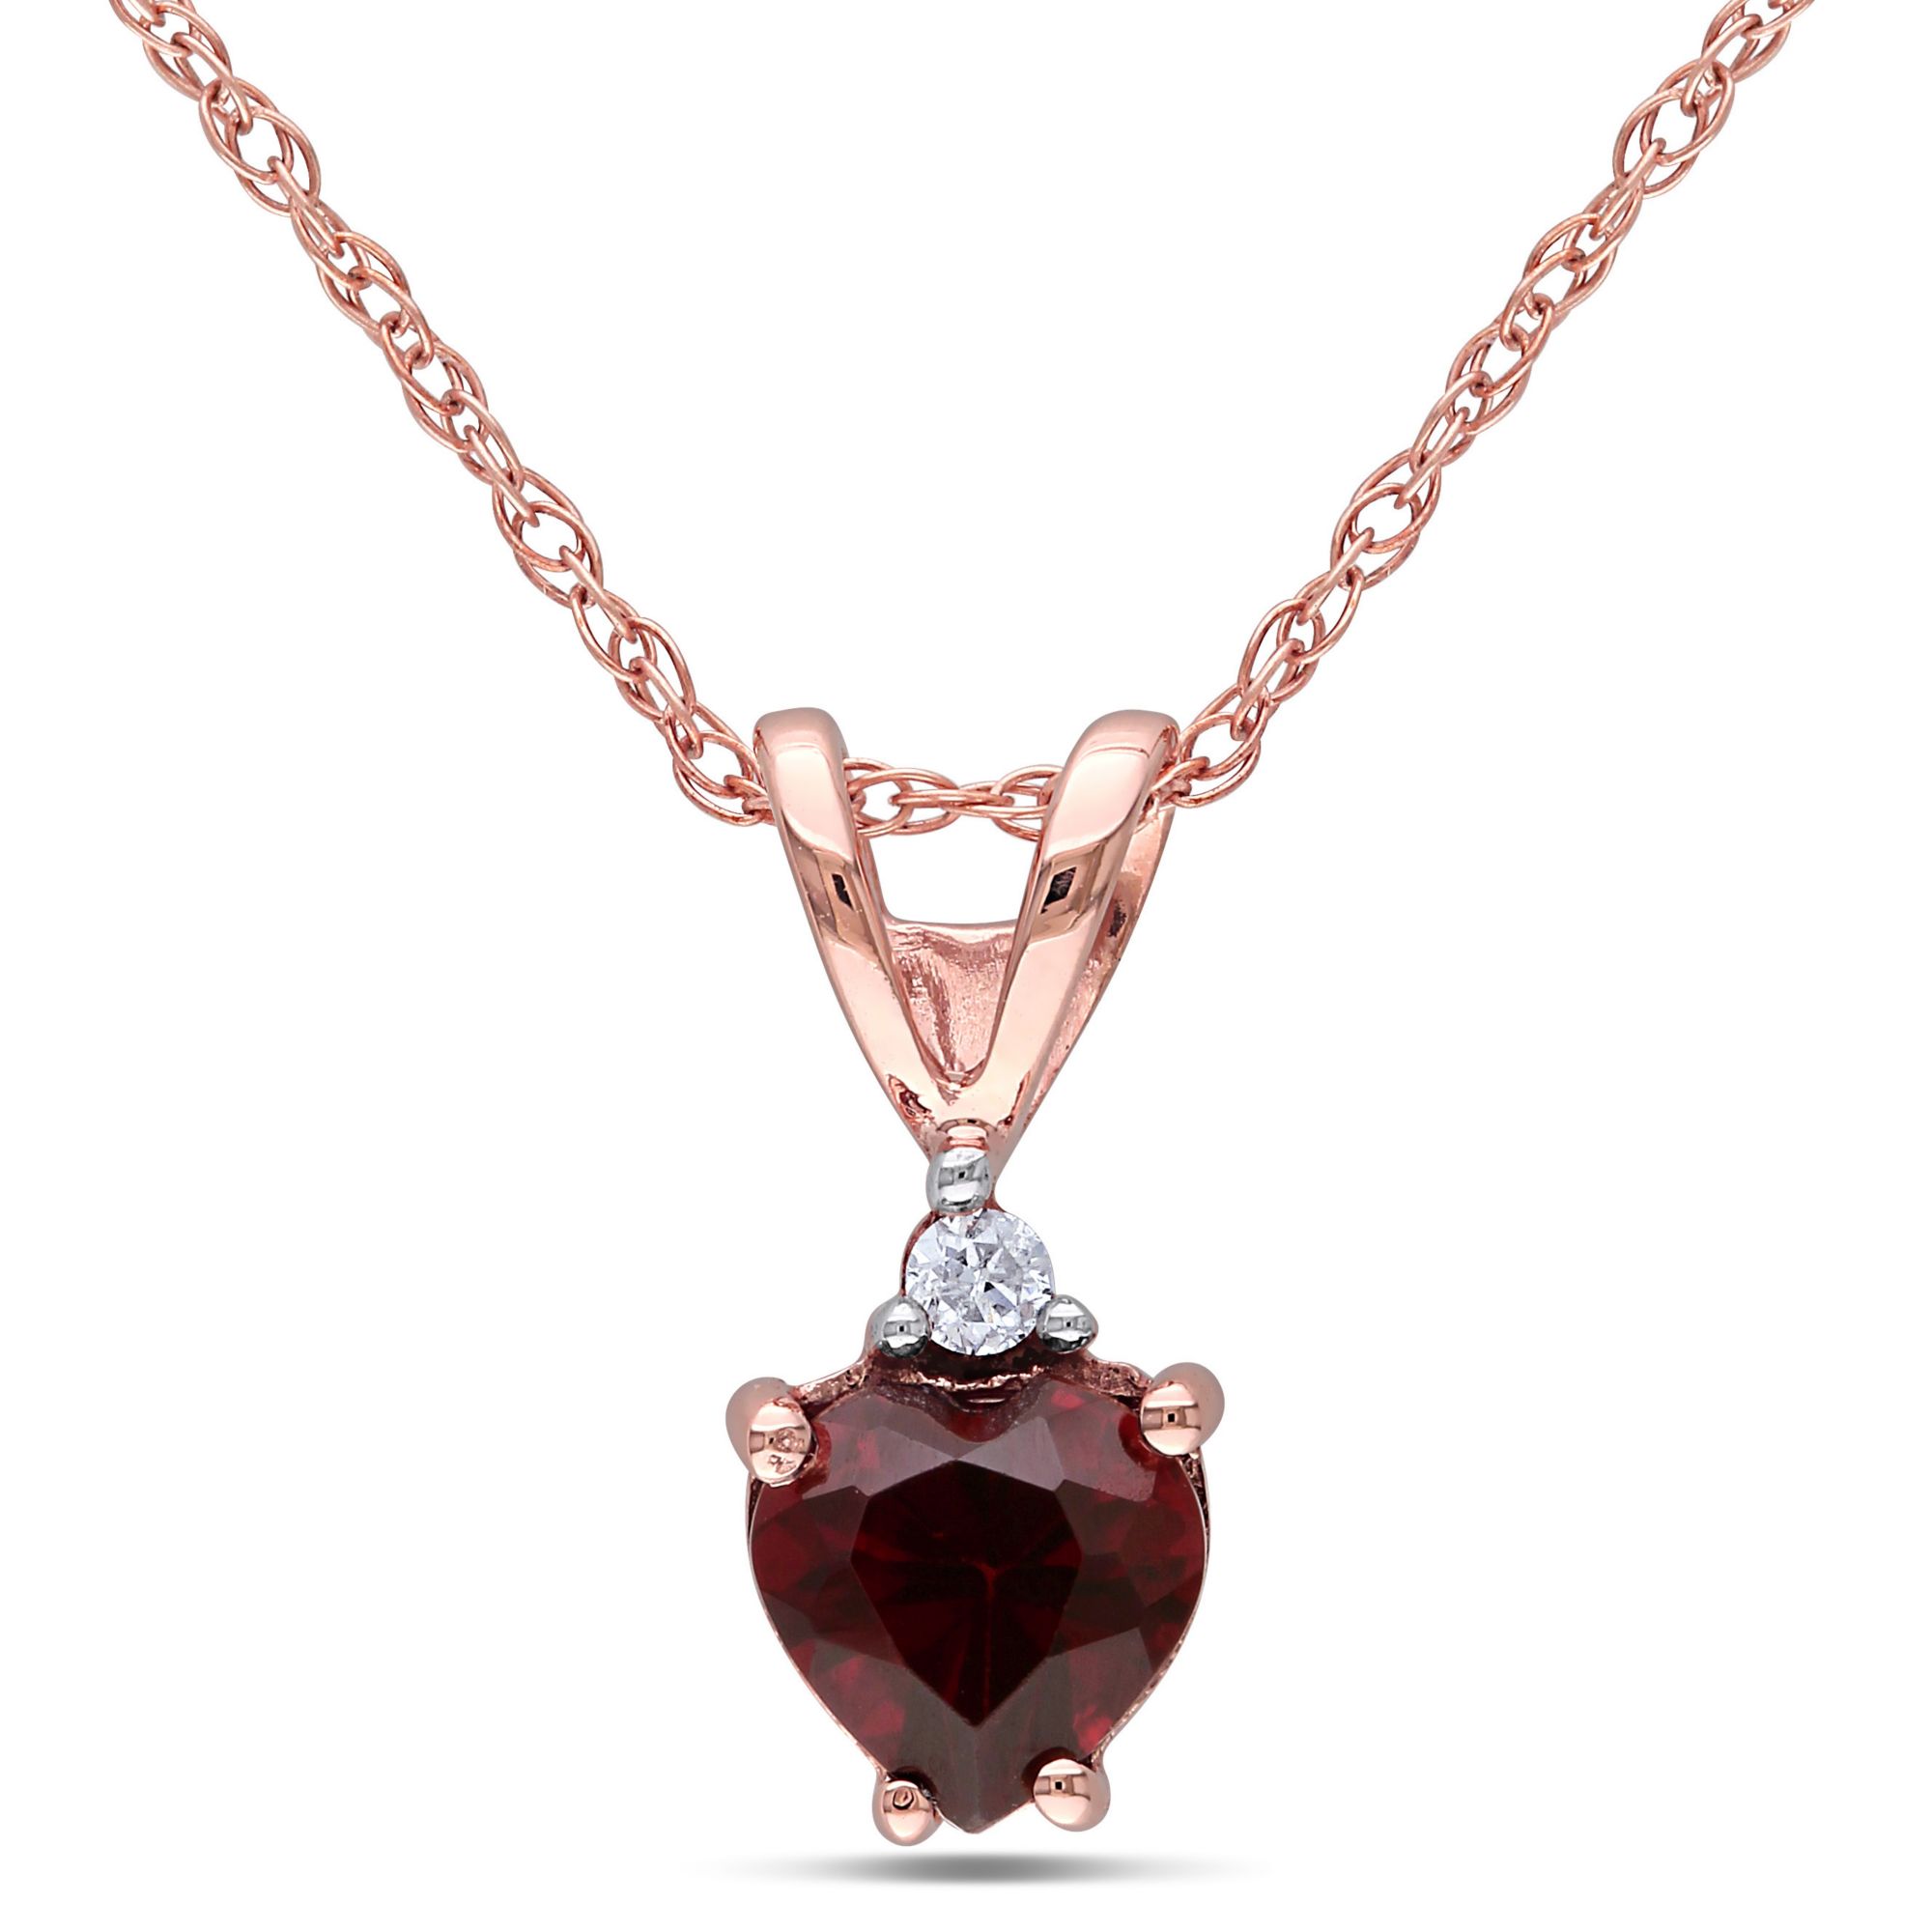 .50 ct. TGW Garnet and Diamond Accent Heart Pendant in 10k Pink Gold